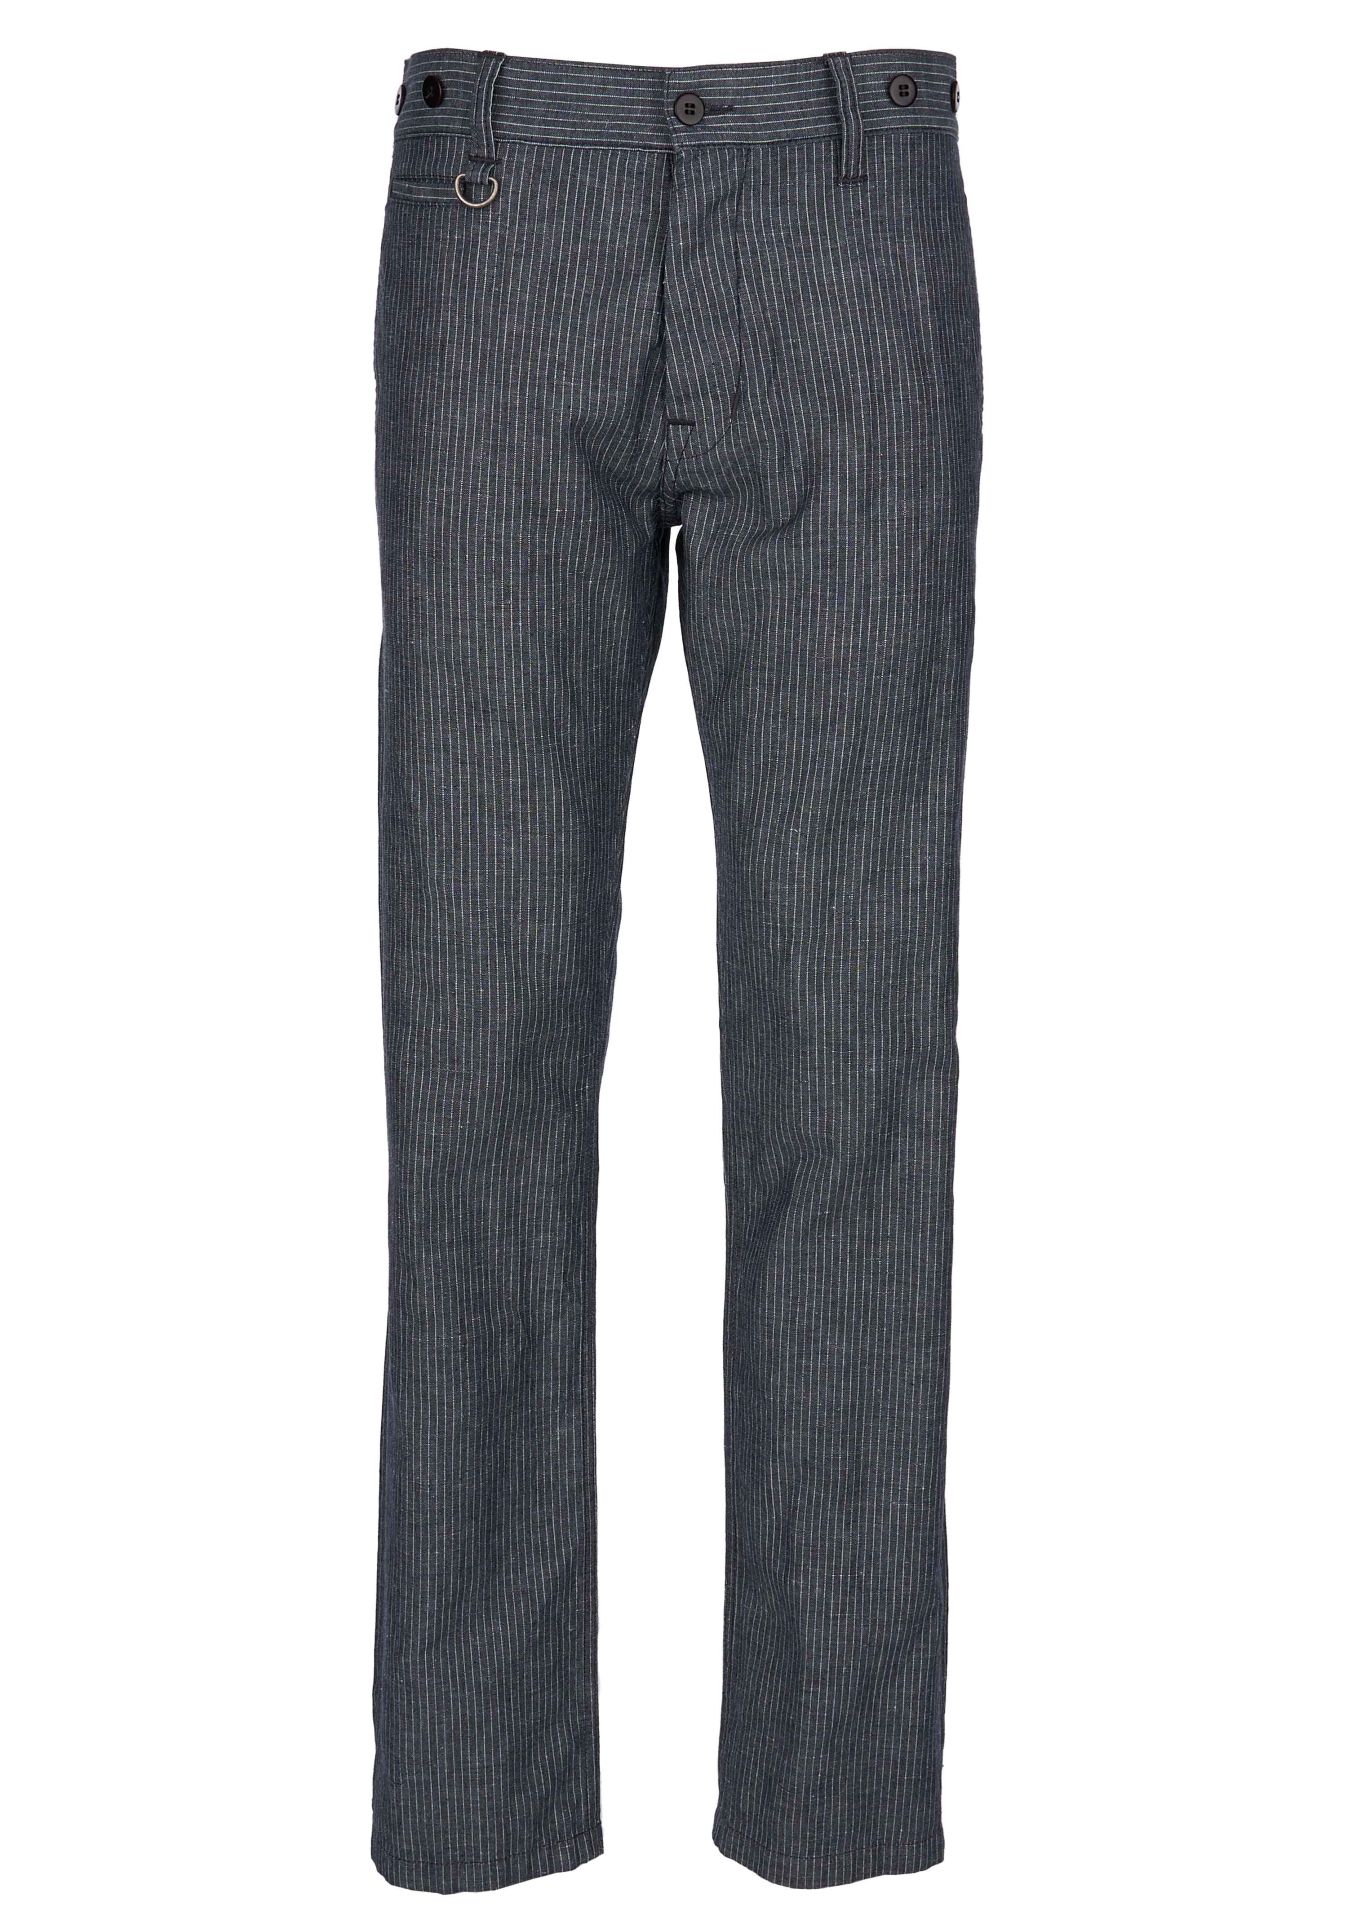 1942 Hunting Pant grey striped linen (Pike Brothers)